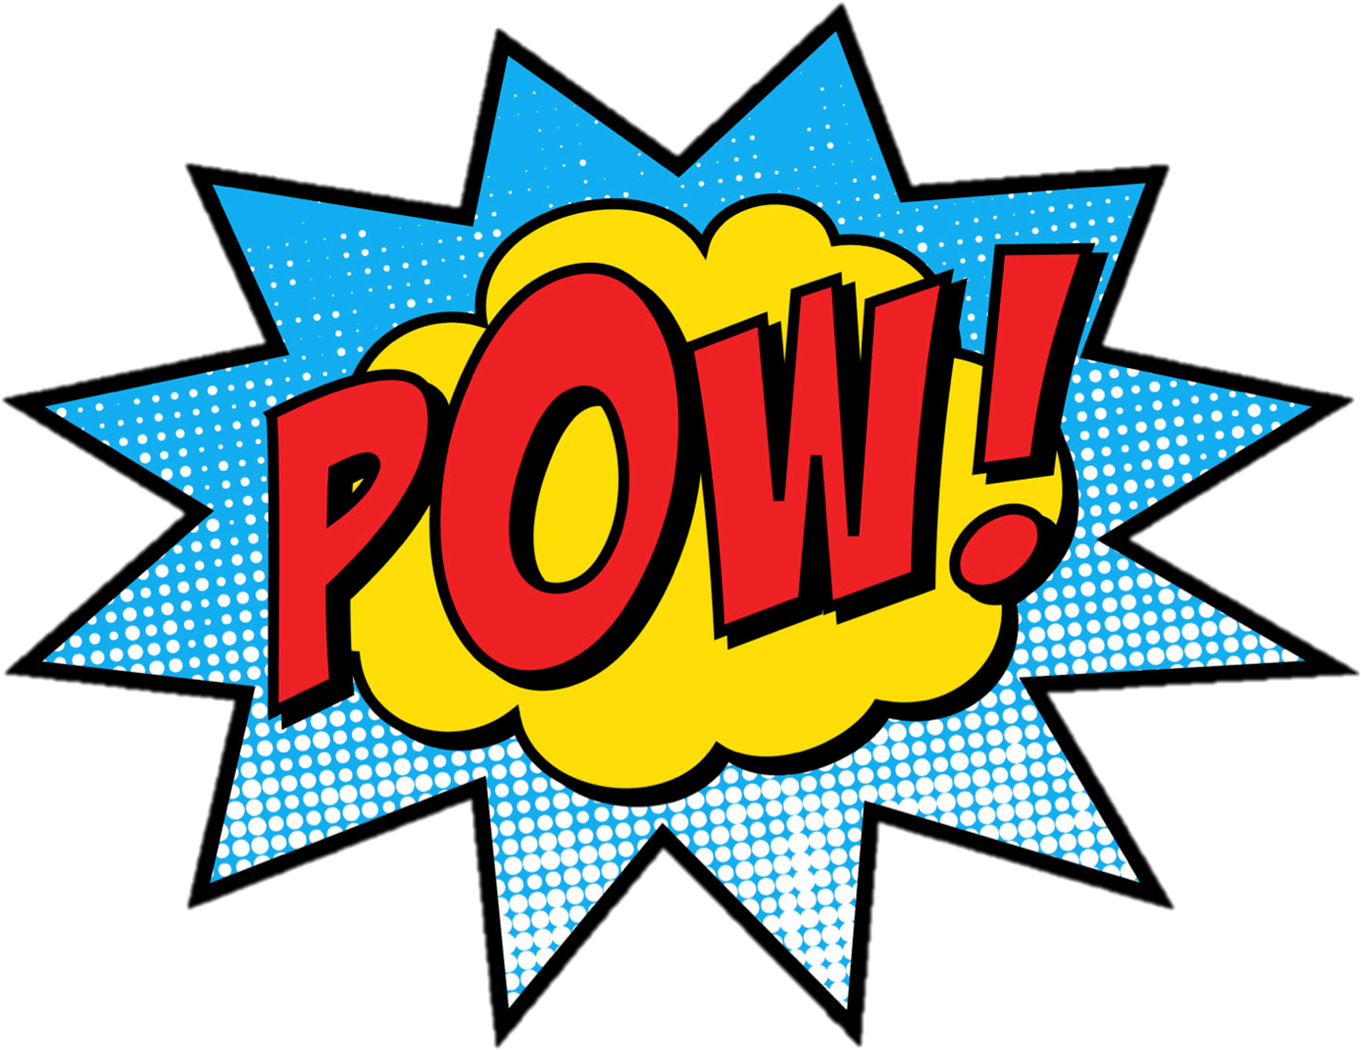 Image of cartoon cloud with the word Pow! in the center